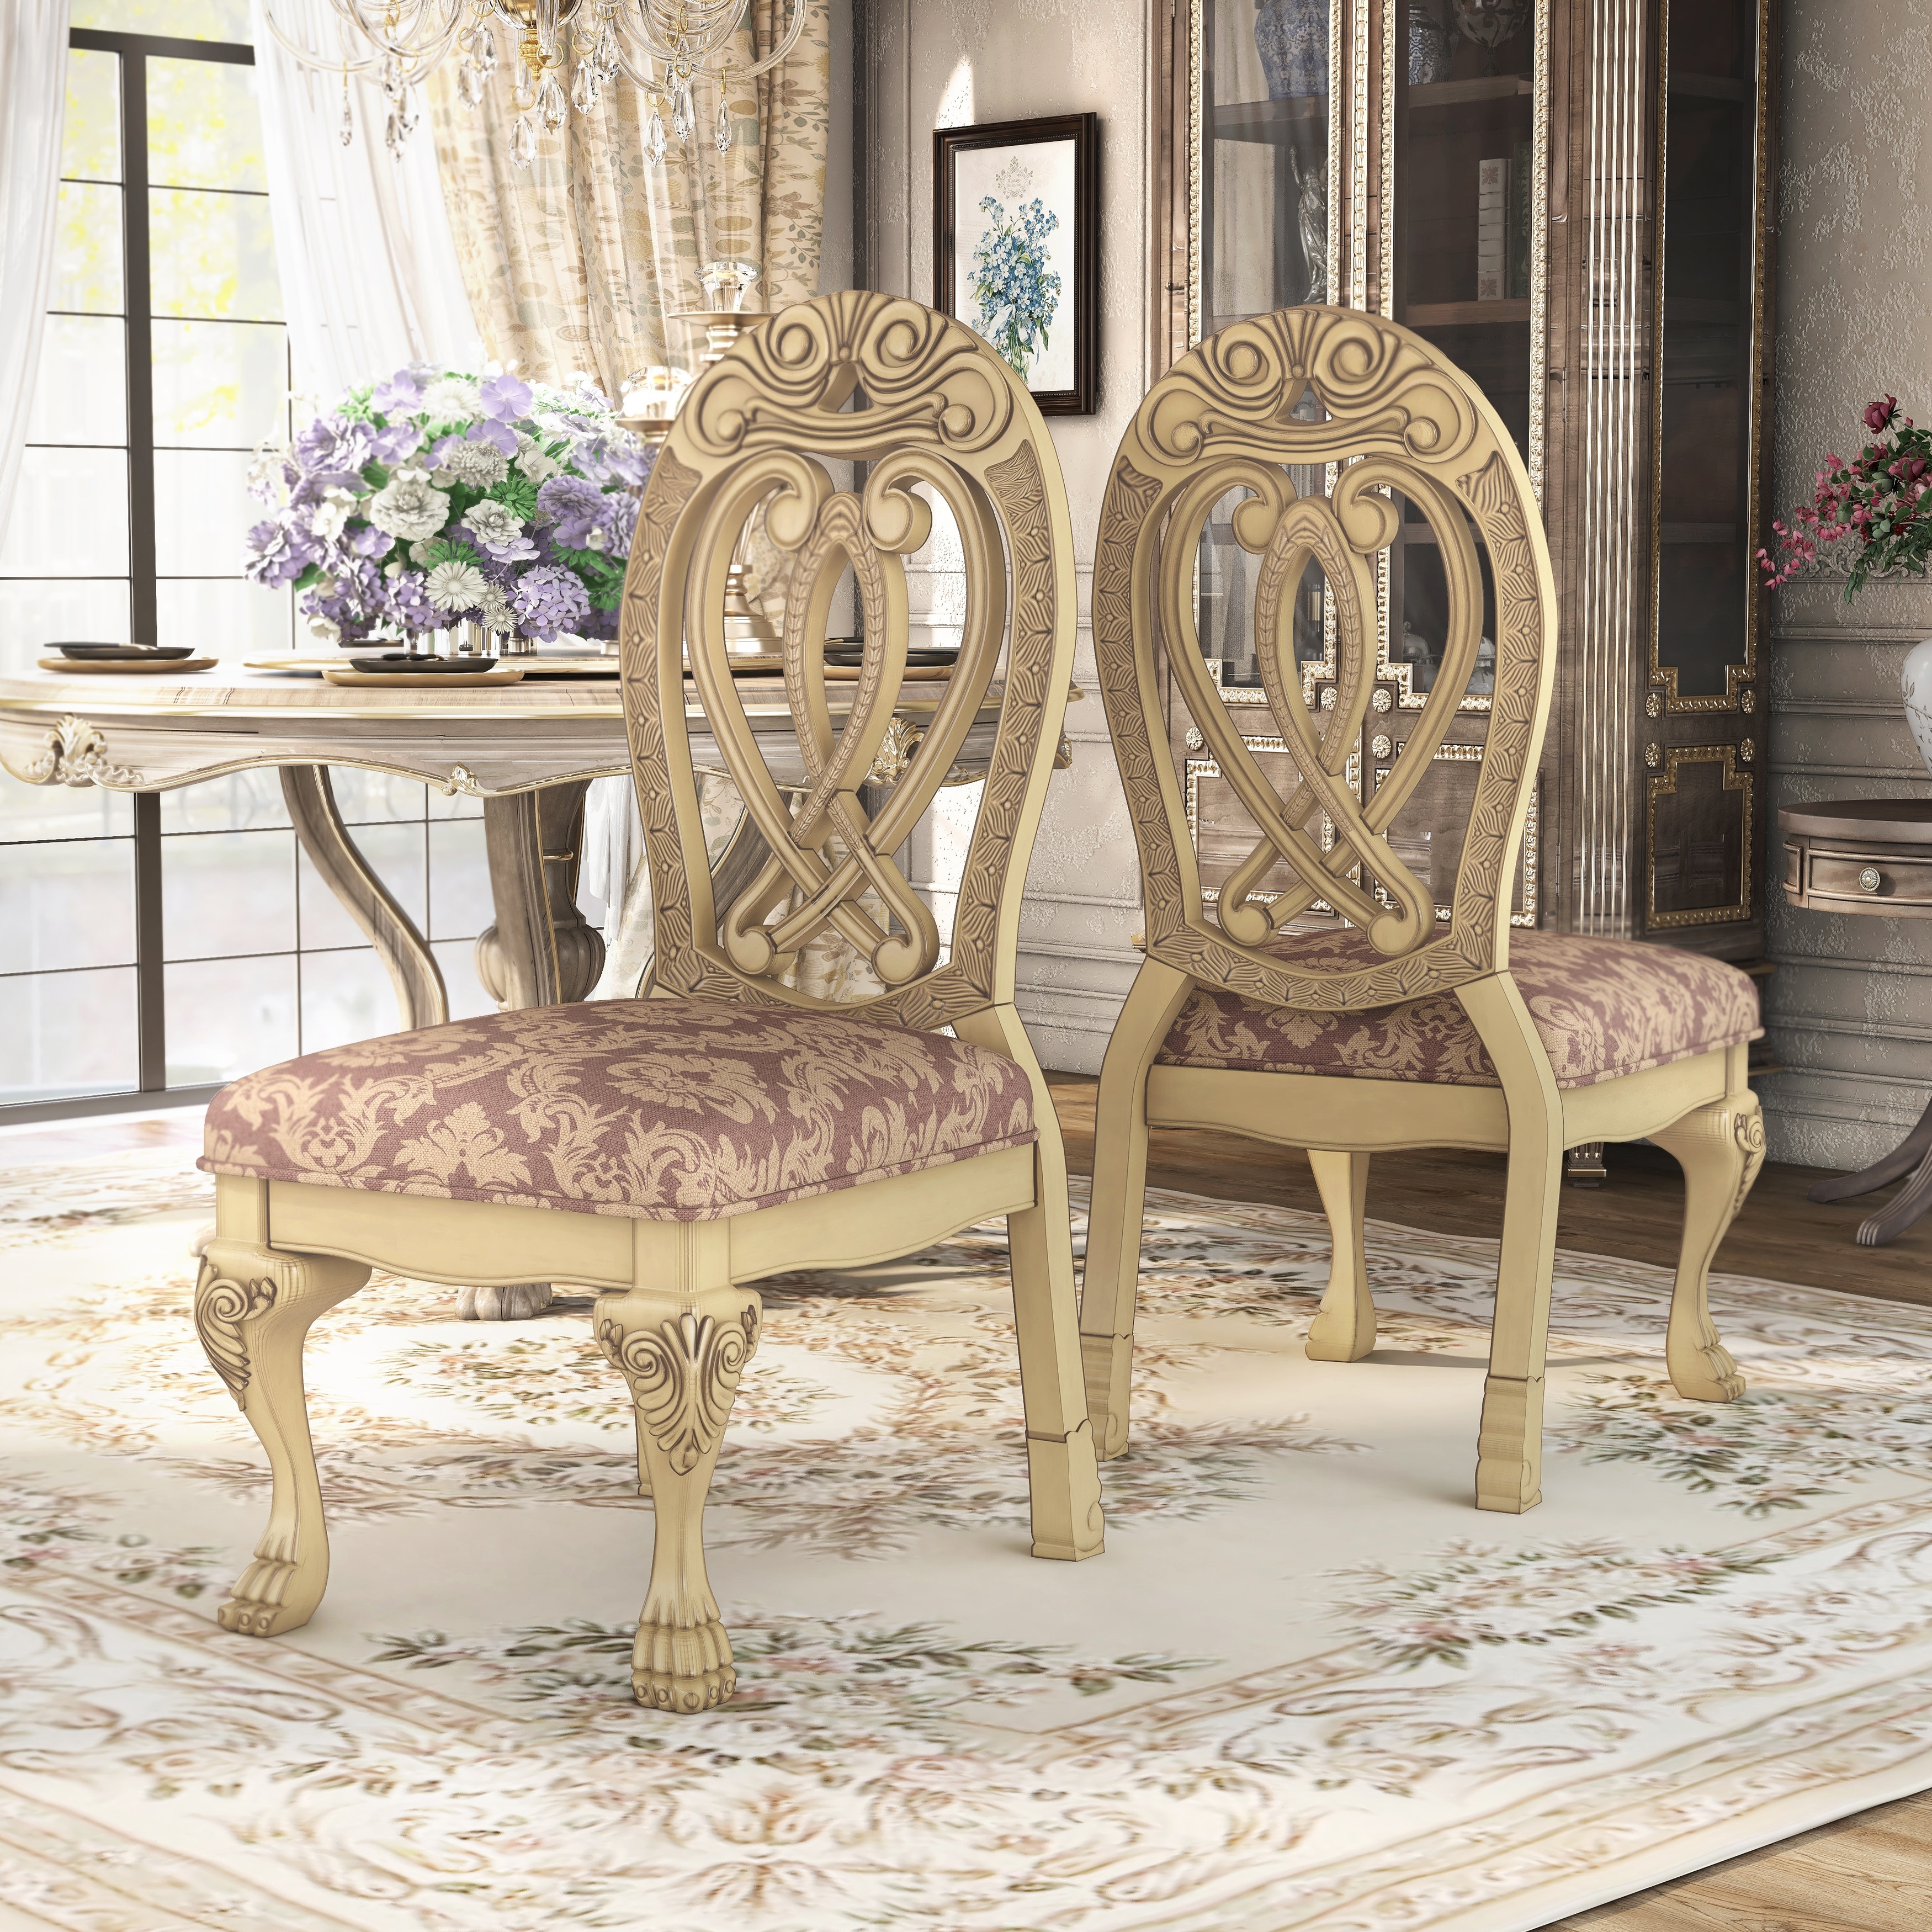 French Louis XVI Dining Room Chairs, Faux Leather Upholstery - Set